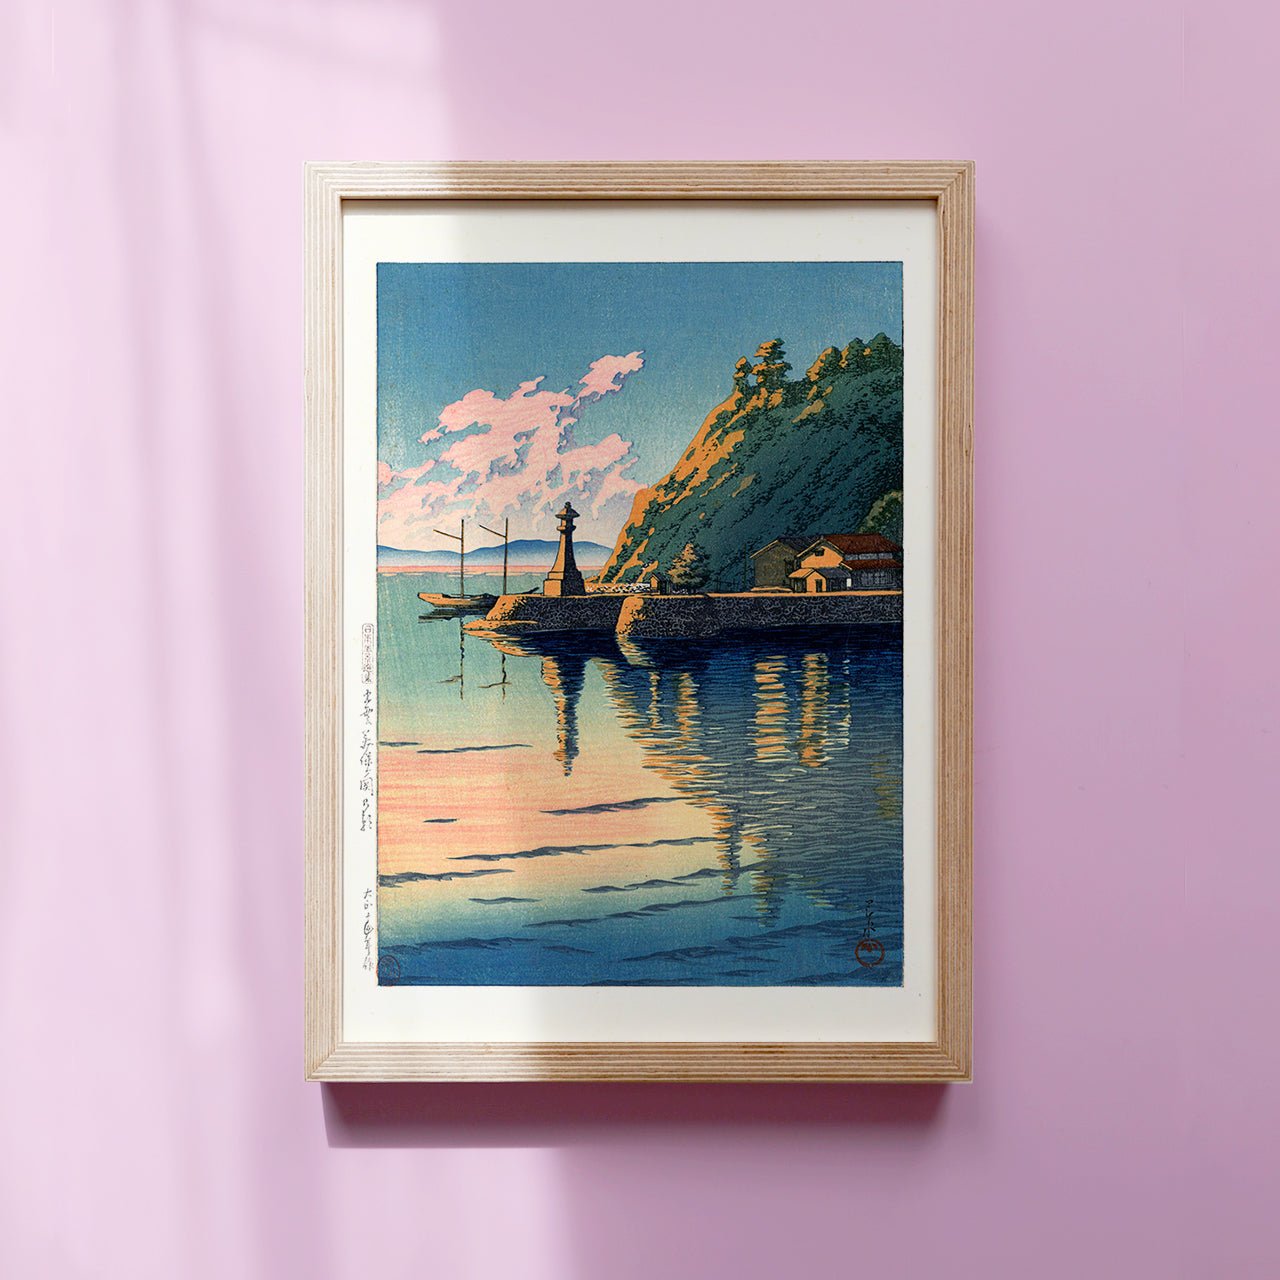 Framed Japanese art poster By Kawase Hasui: Lighthouse and boat on calm sea. Morning sun gently illuminates a serene cape. 